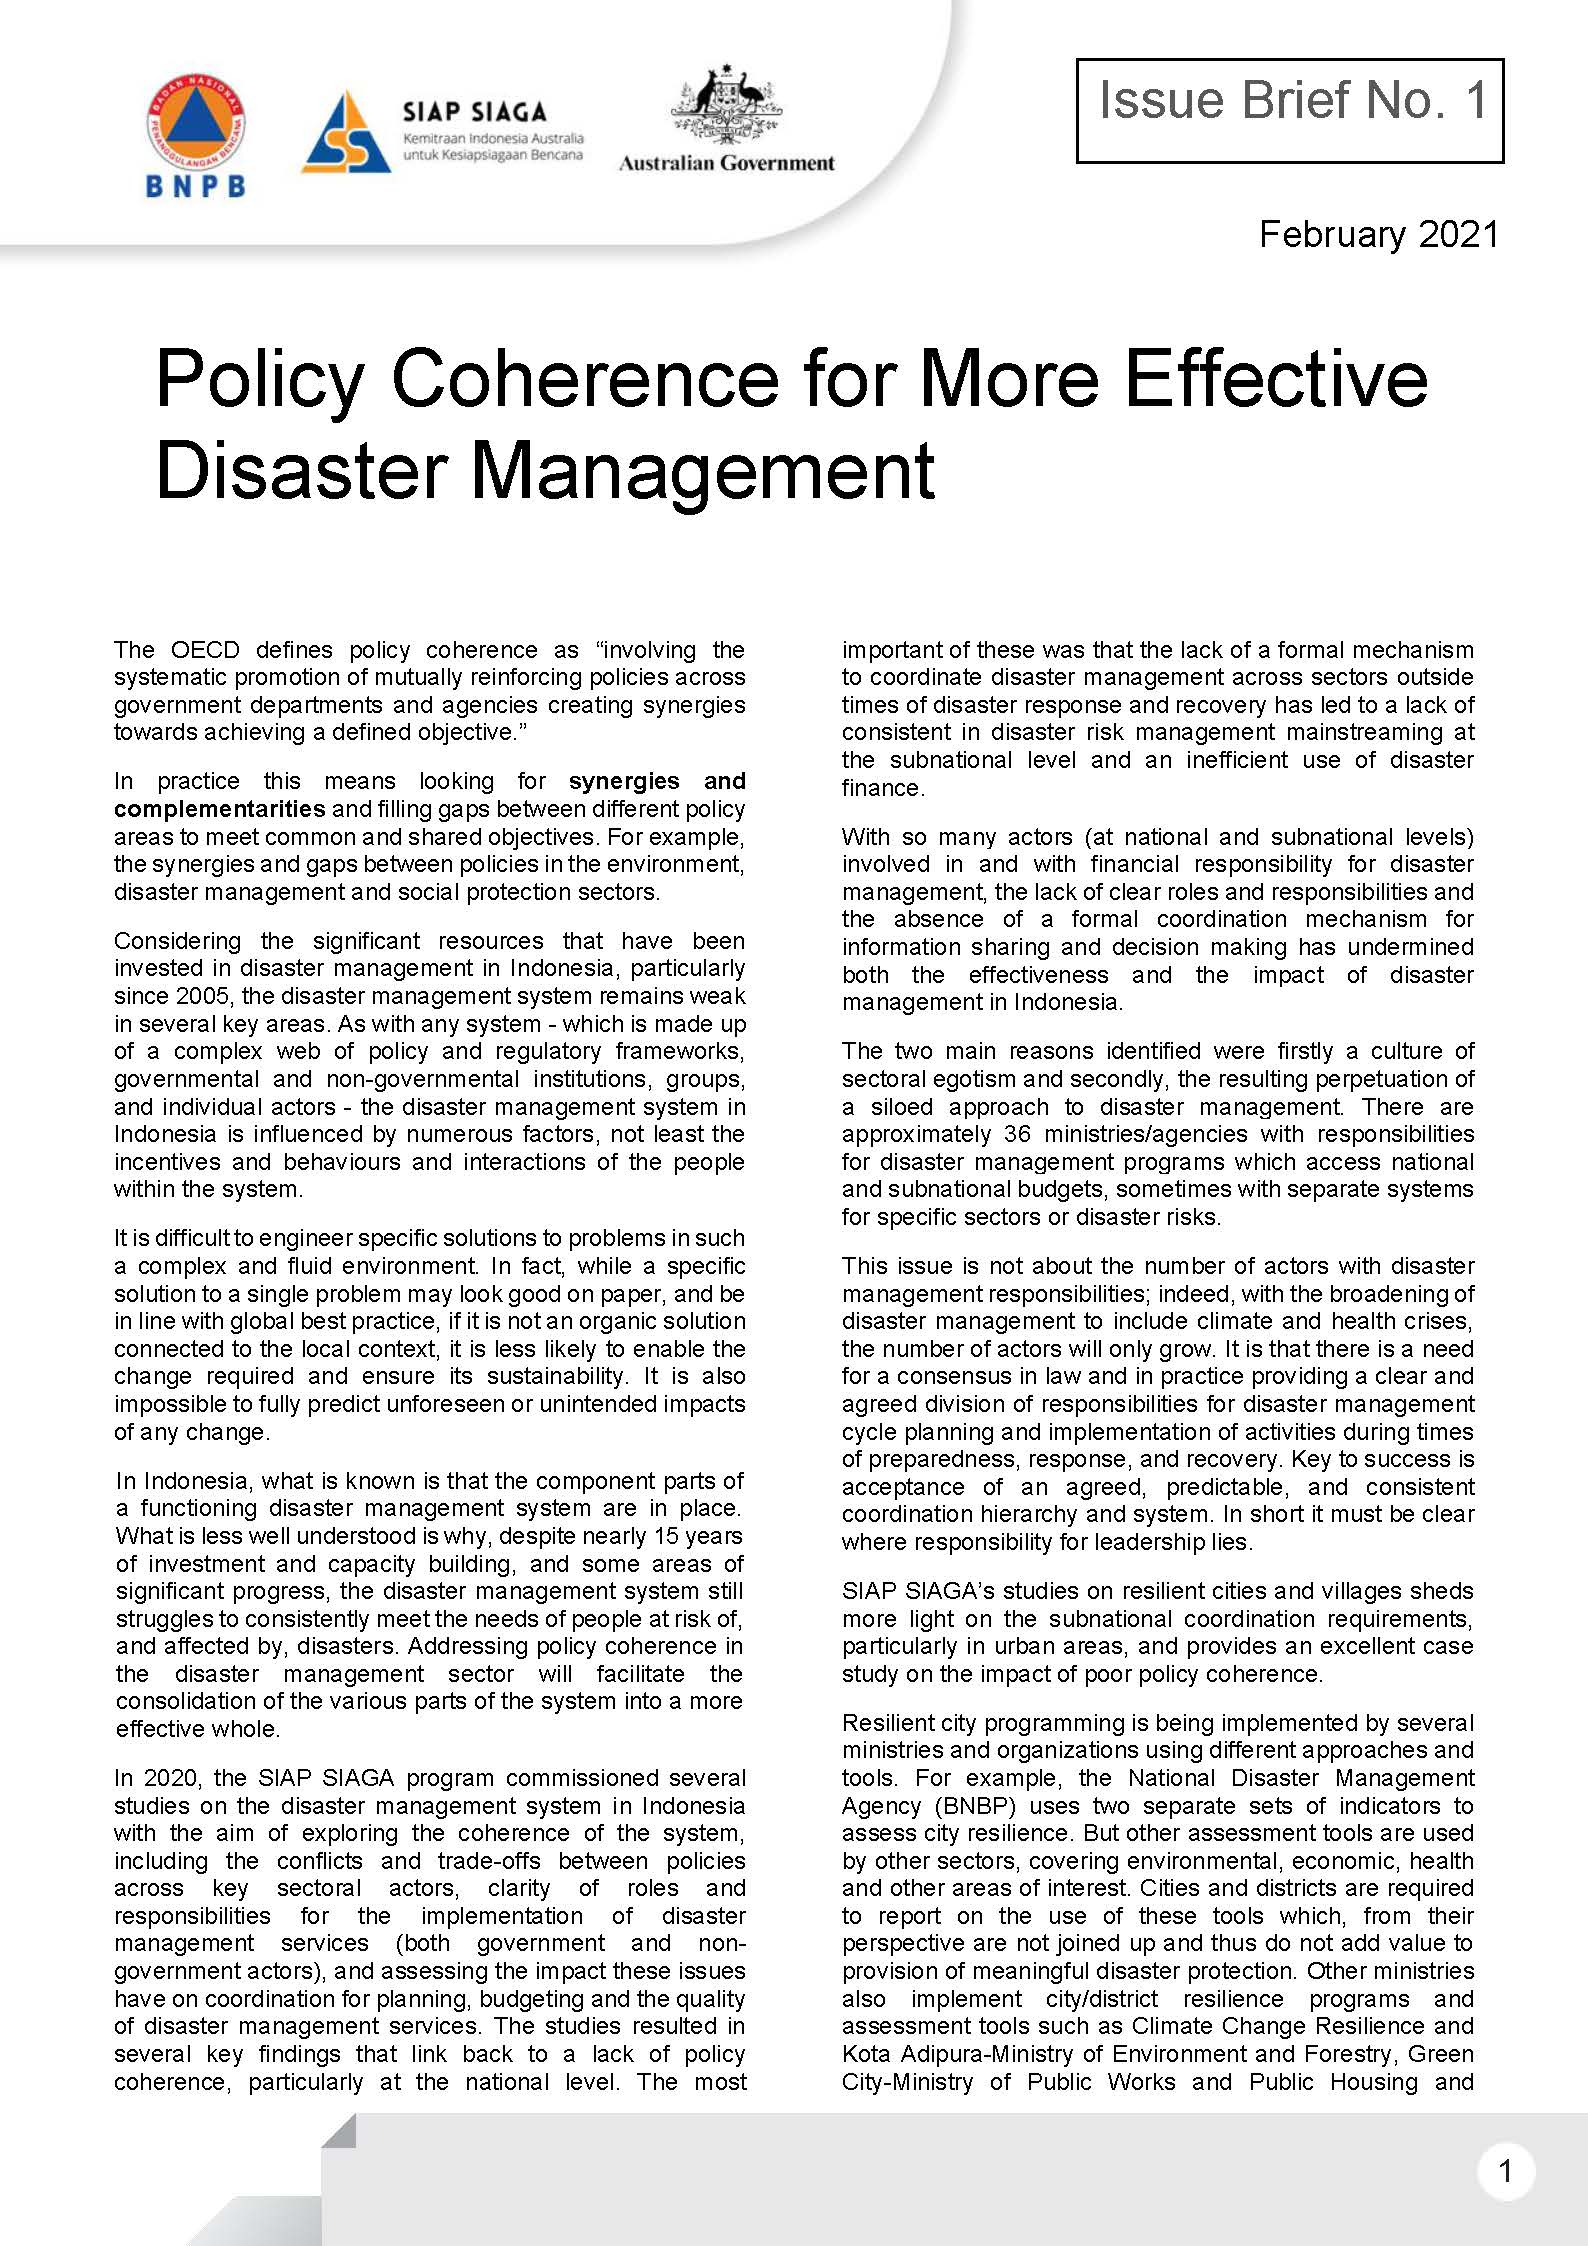 Issue Brief 1 – Policy Coherence for More Effective Disaster Management